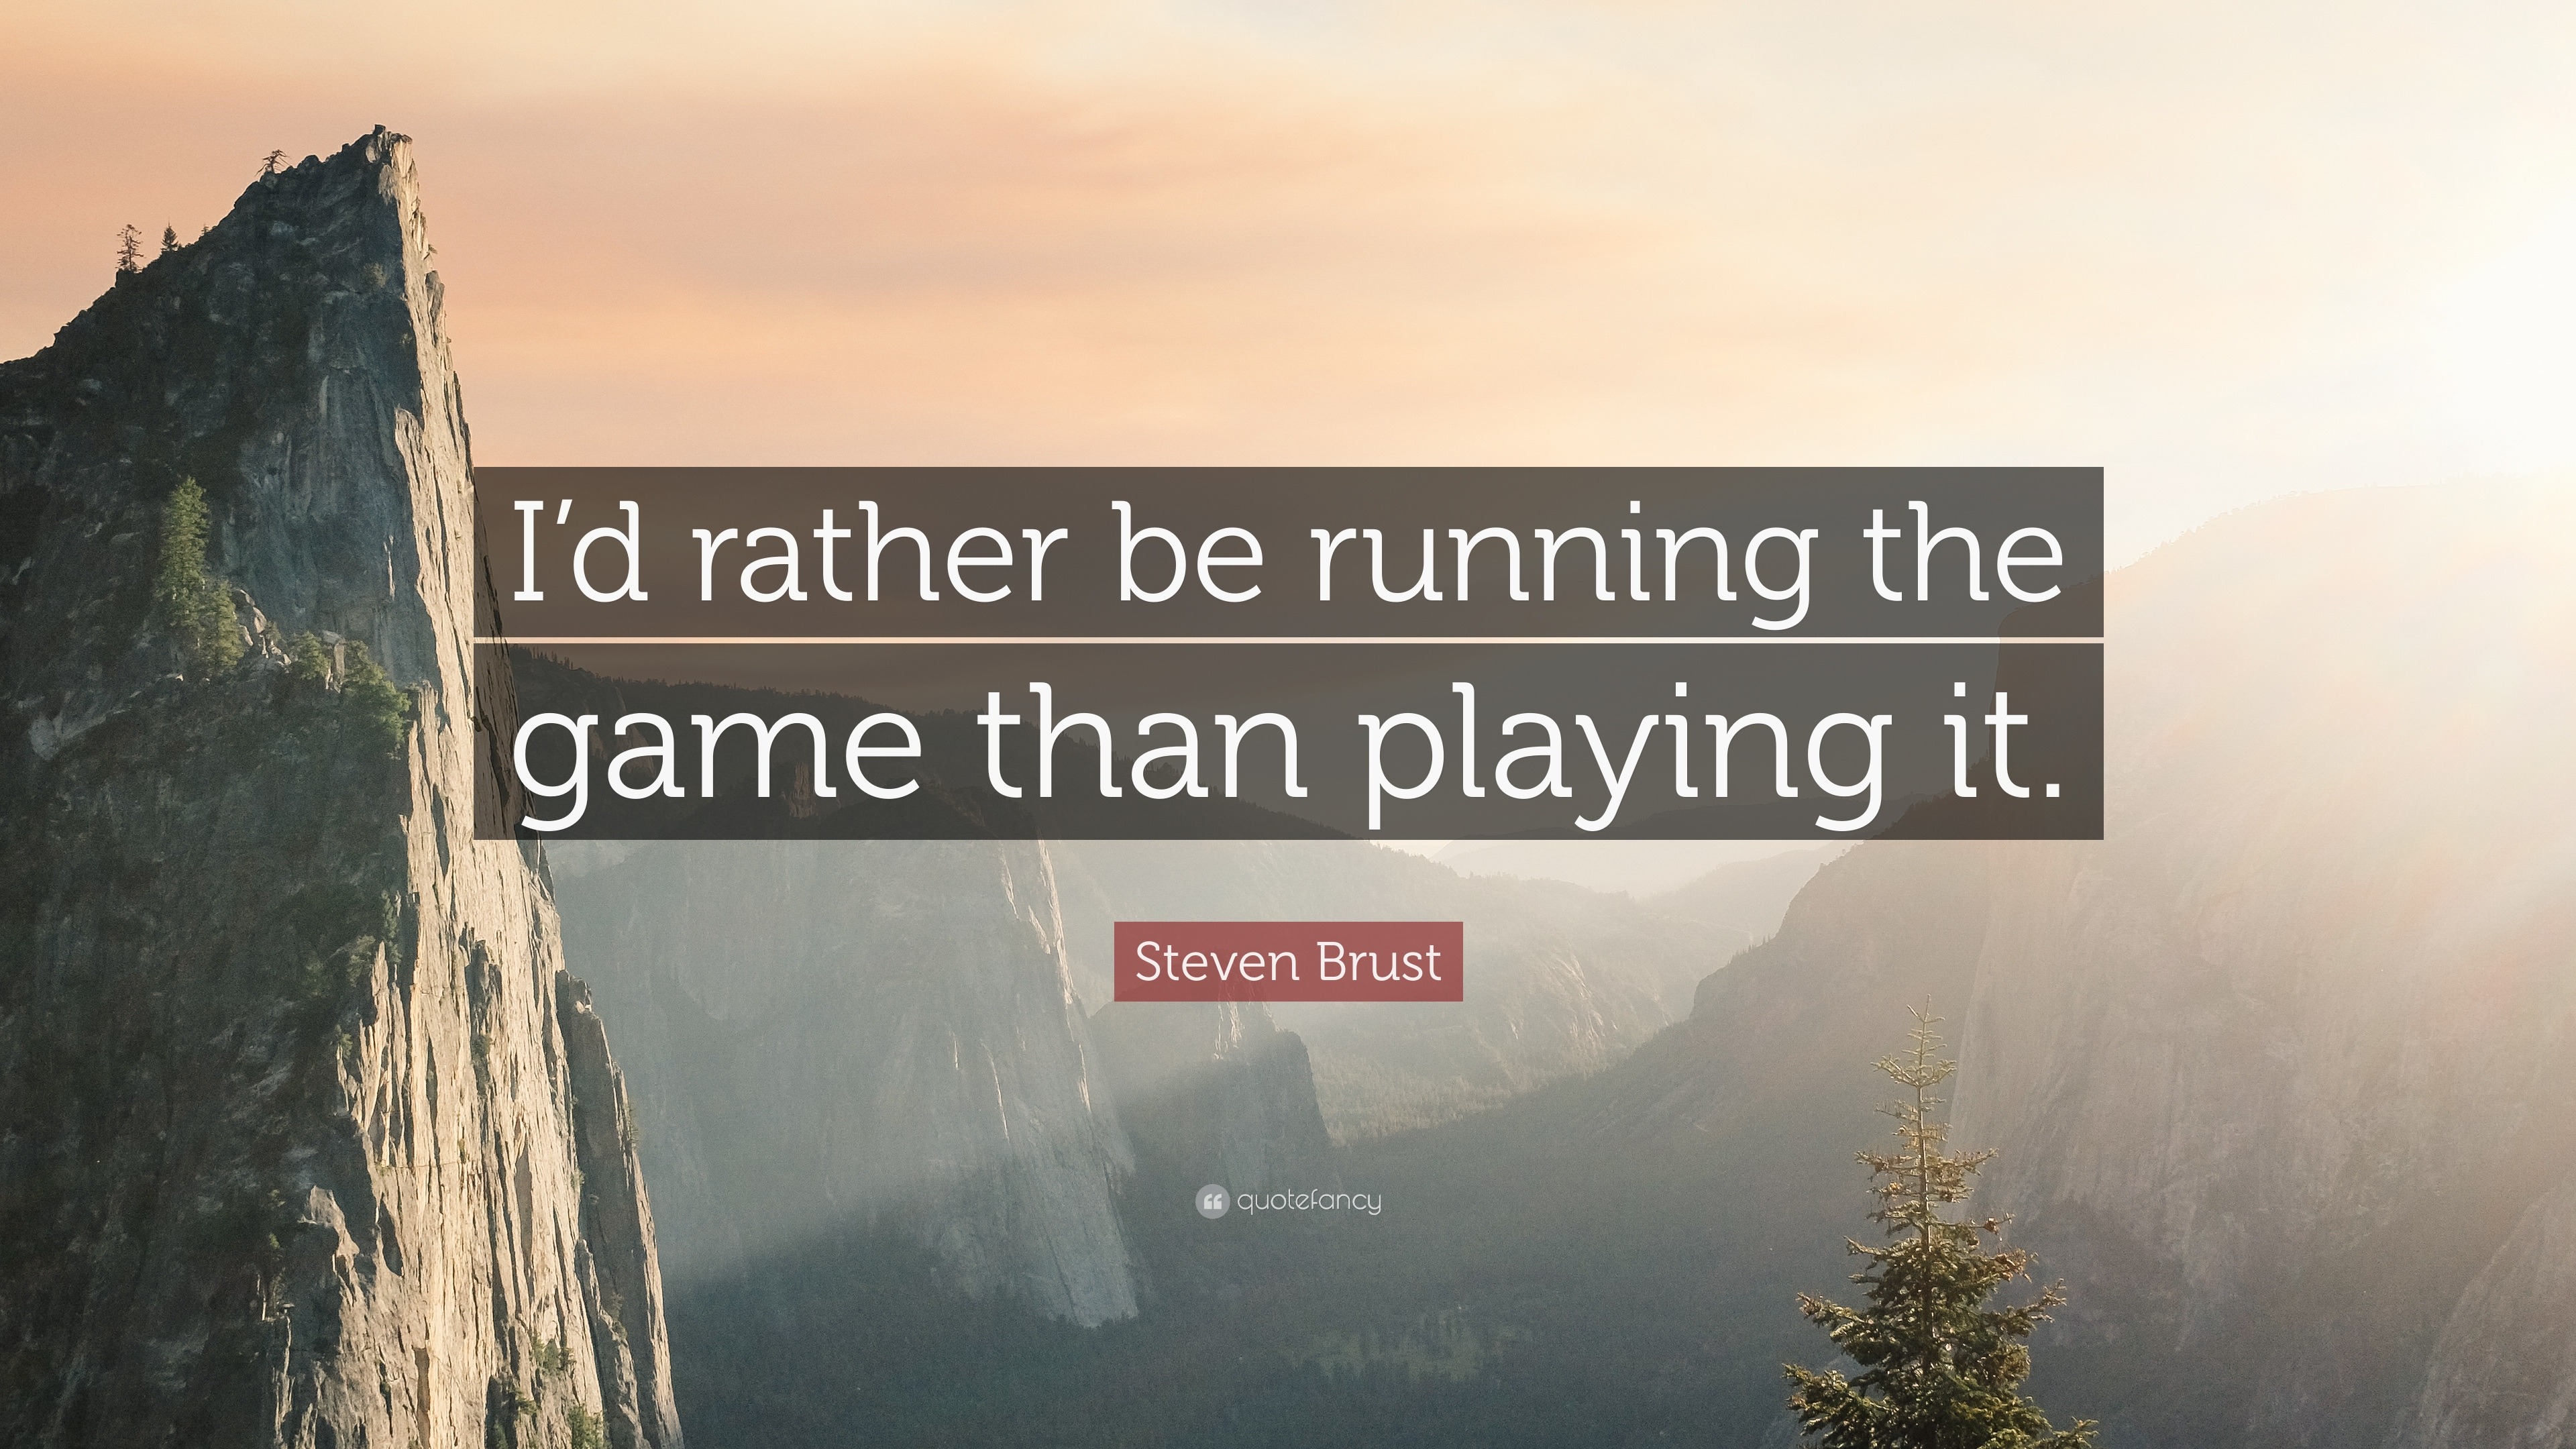 https://quotefancy.com/media/wallpaper/3840x2160/864127-Steven-Brust-Quote-I-d-rather-be-running-the-game-than-playing-it.jpg